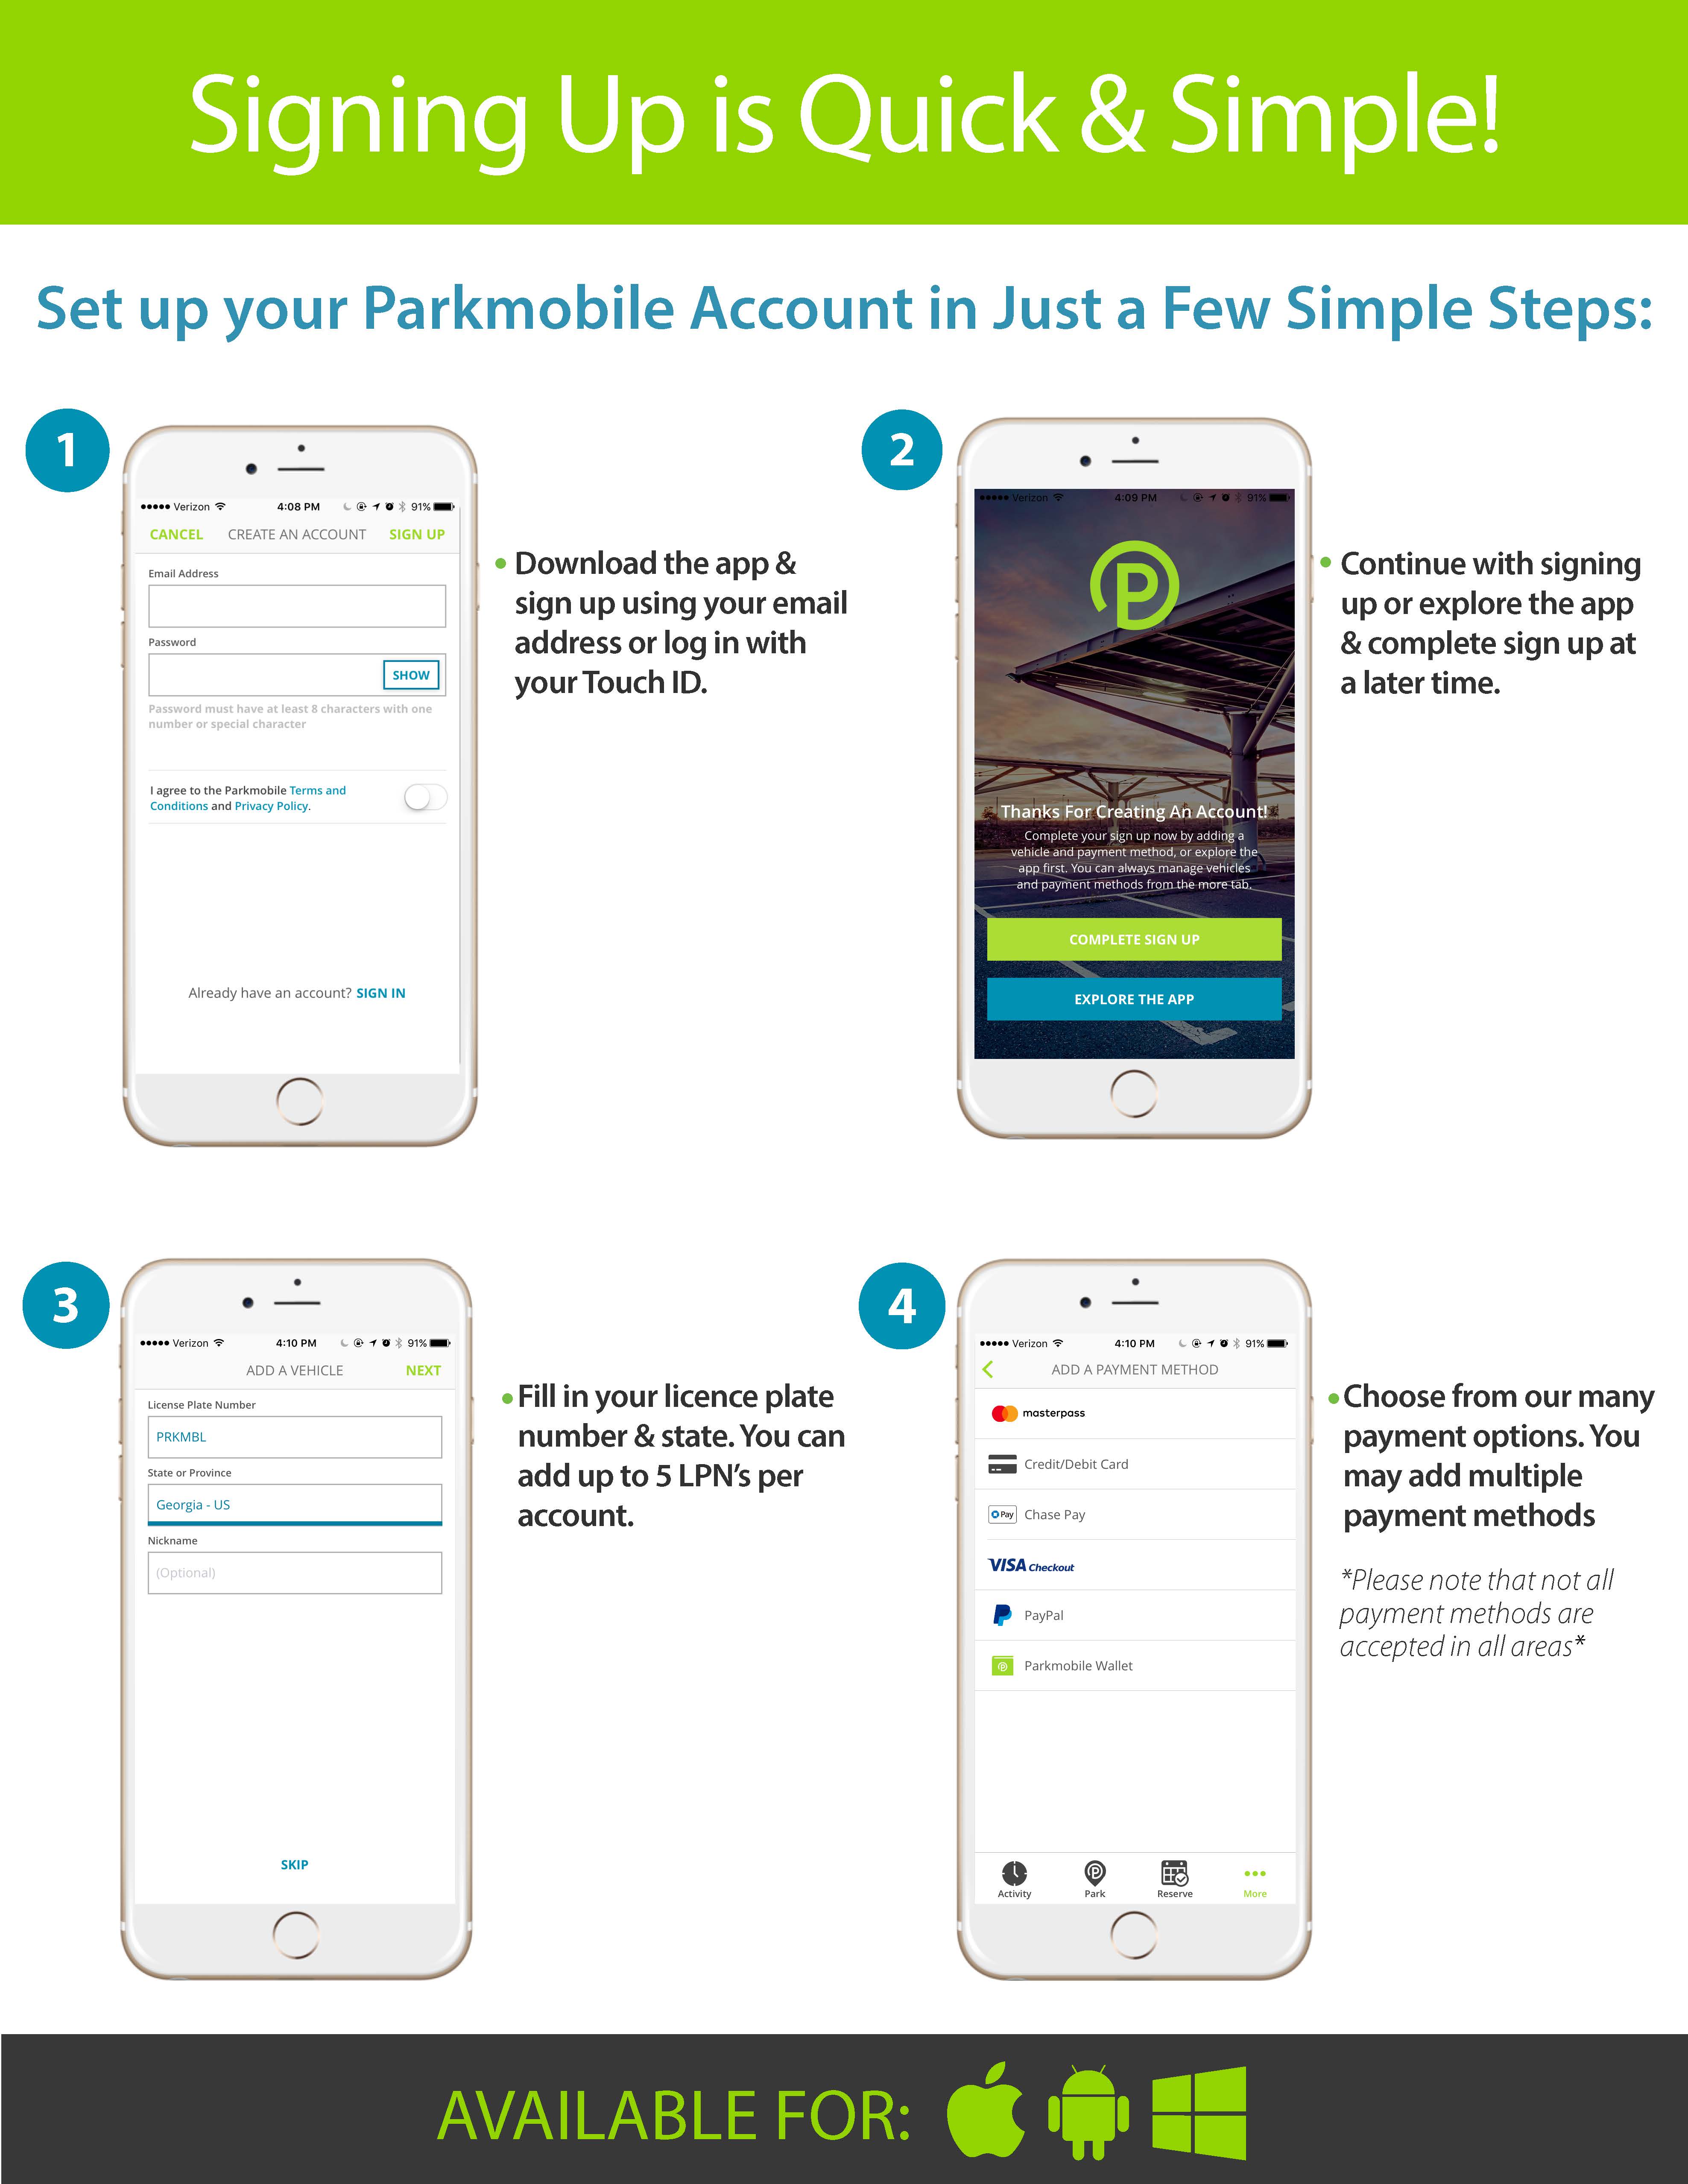 Image of ParkMobile and how to sign up